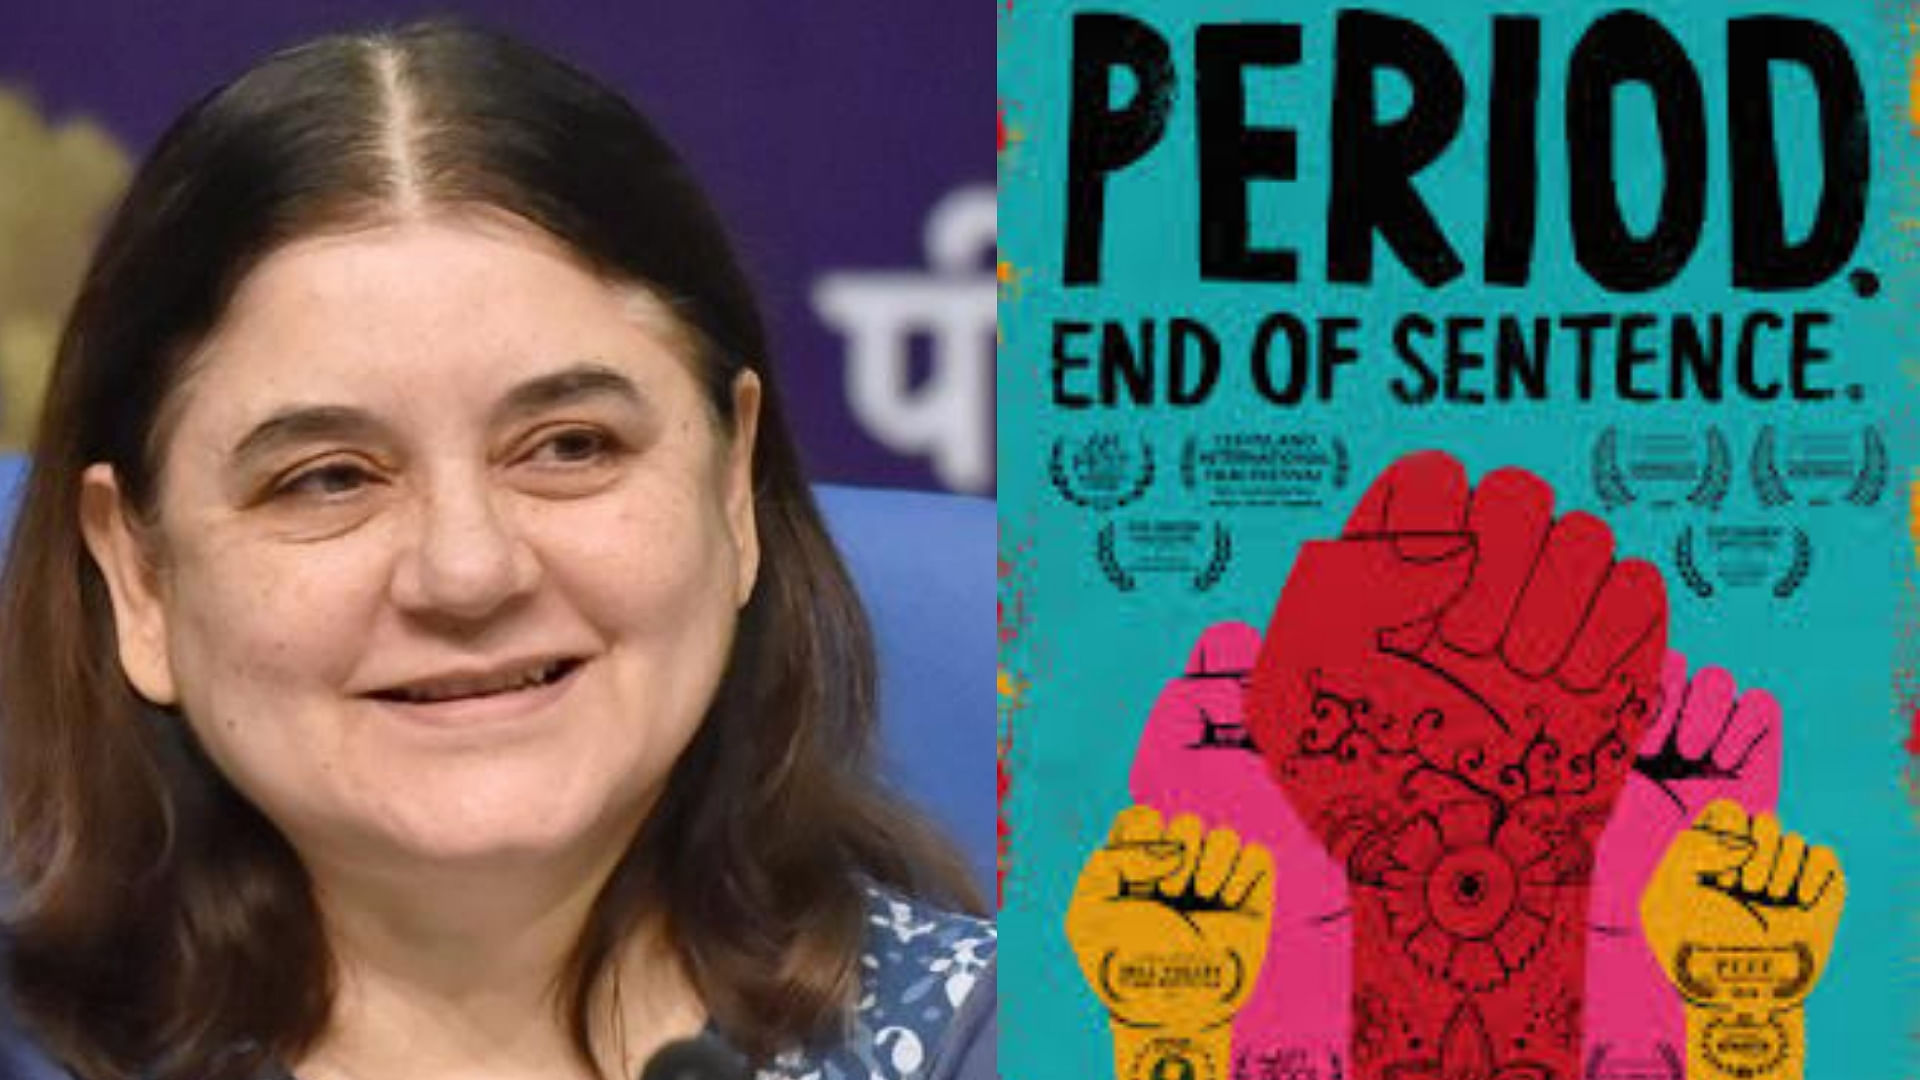 Maneka Gandhi has congratulated the crew of the film<i> Period. End Of Sentence</i> on winning an Oscar, saying that it has helped in starting a conversation on menstruation.